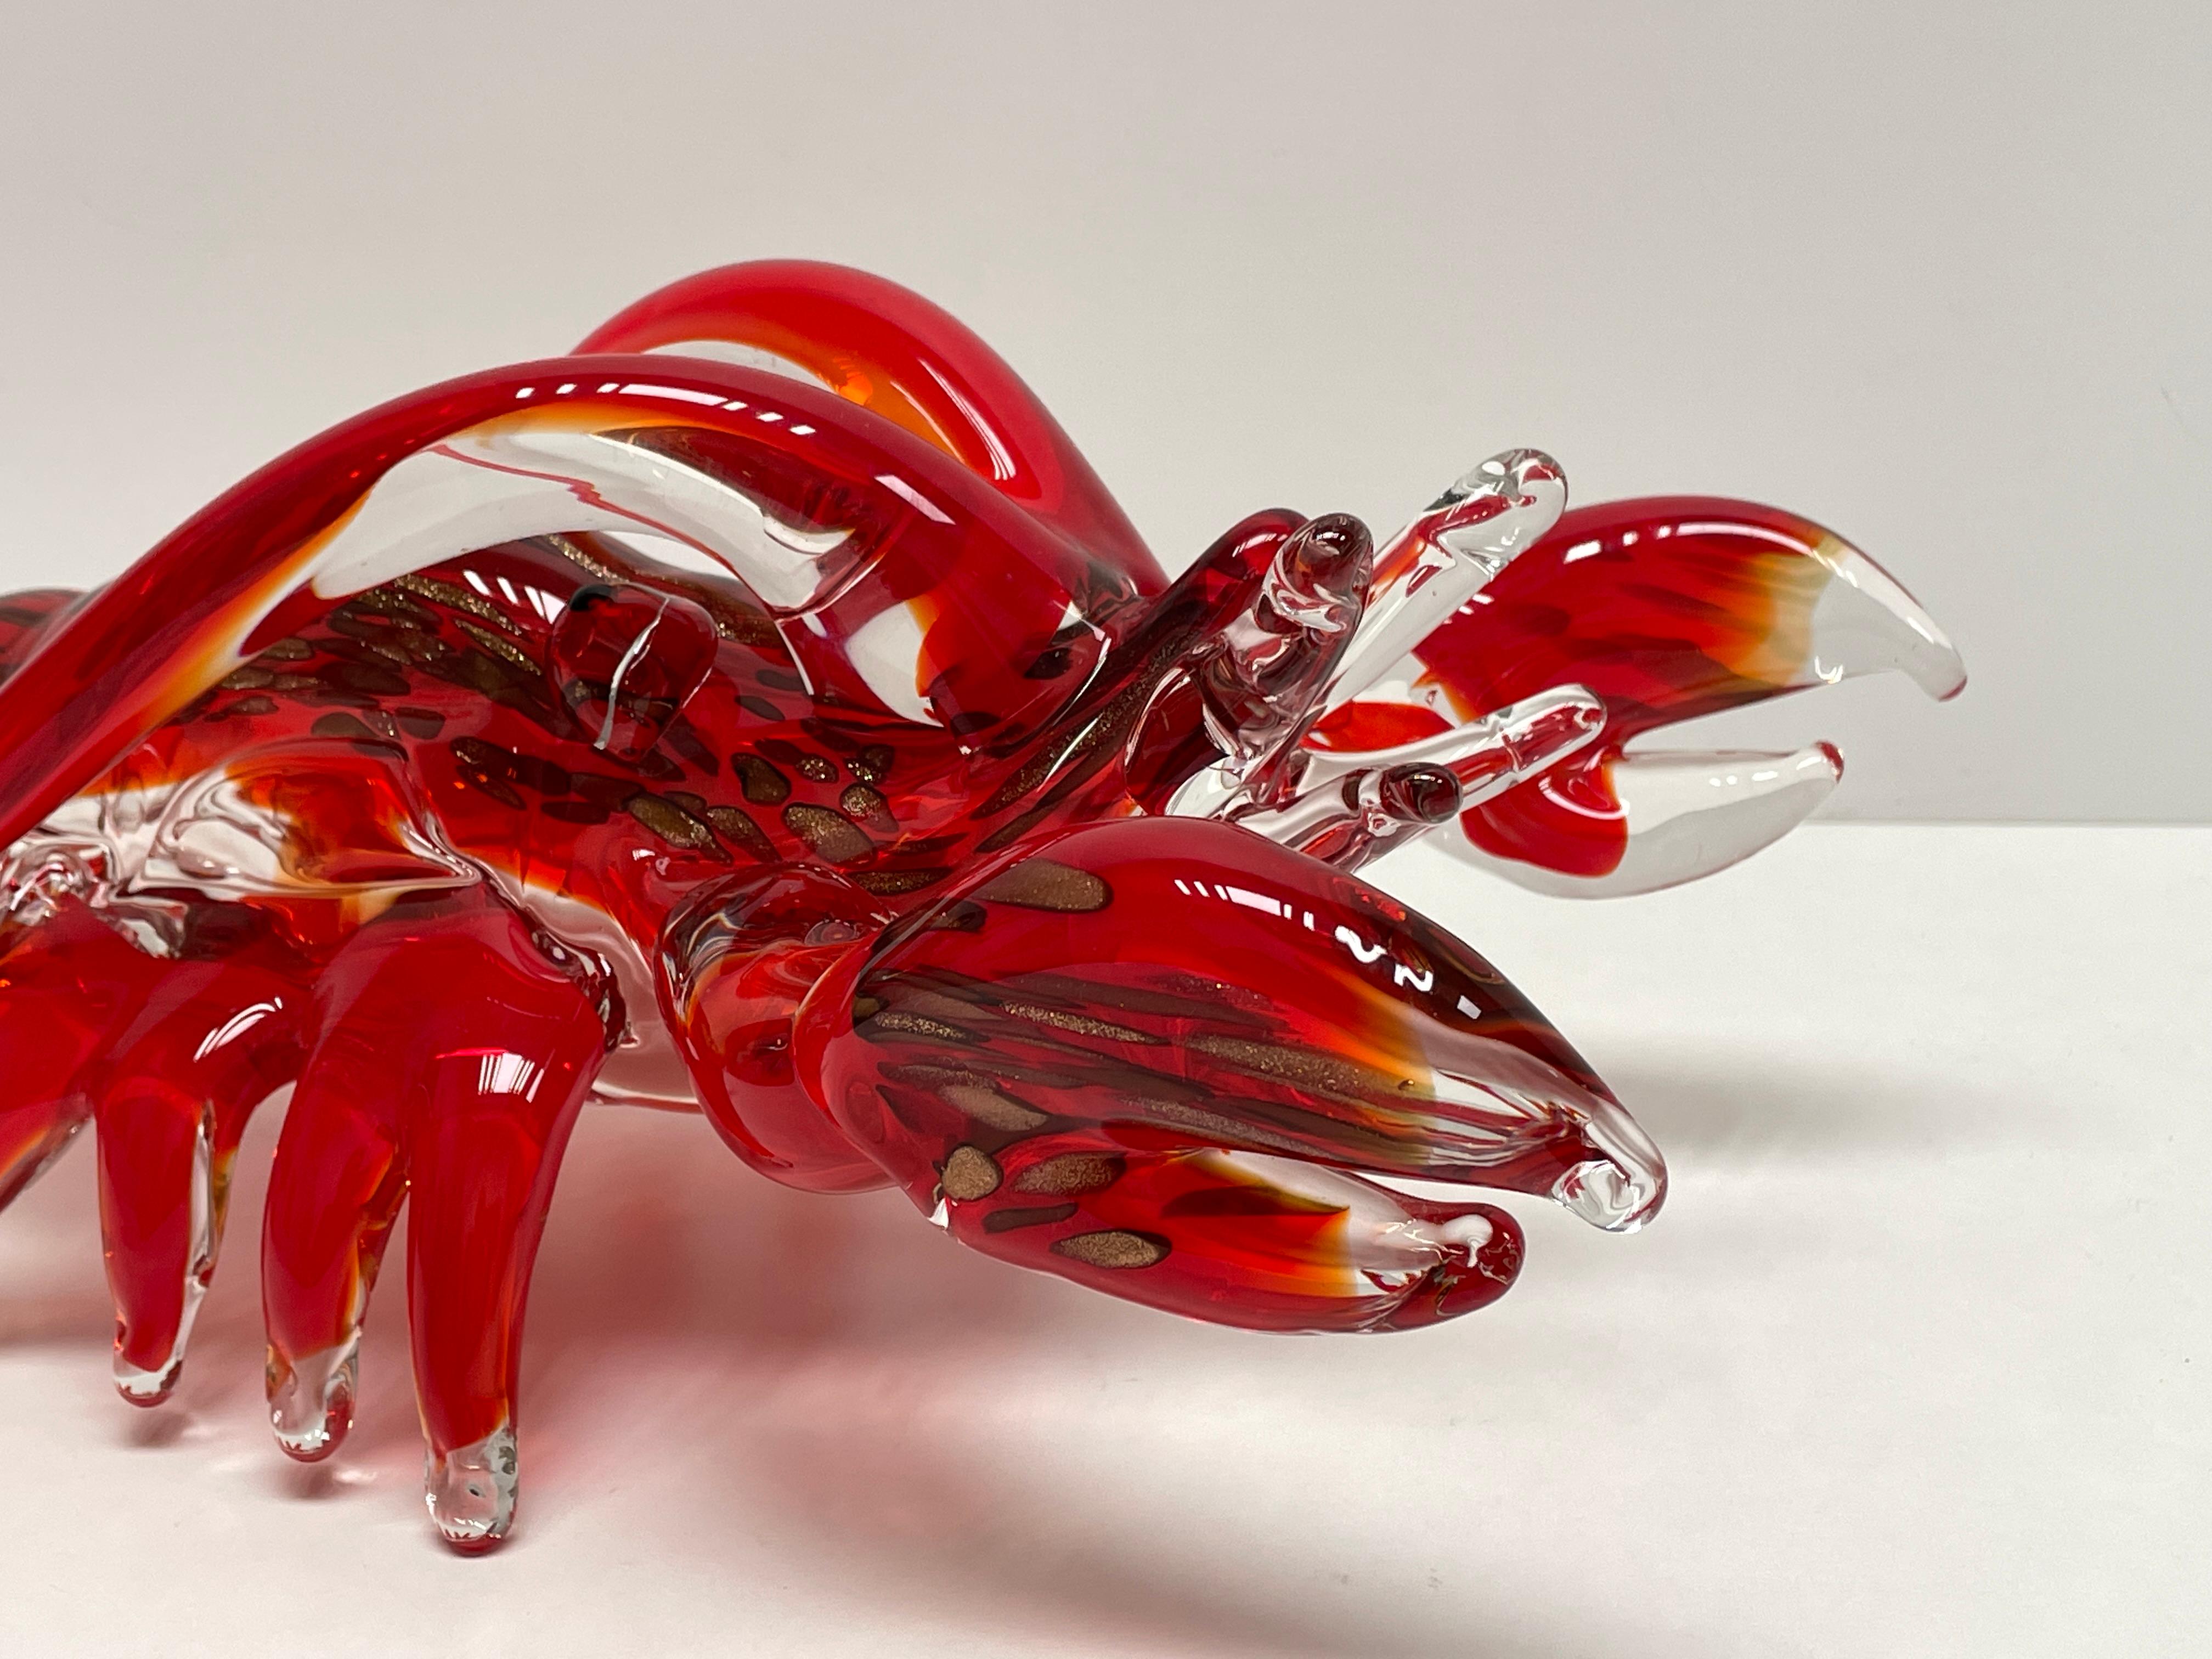 Hand-Crafted Monumental Lobster Sculpture Murano Glass, Vintage, Italy, 1978